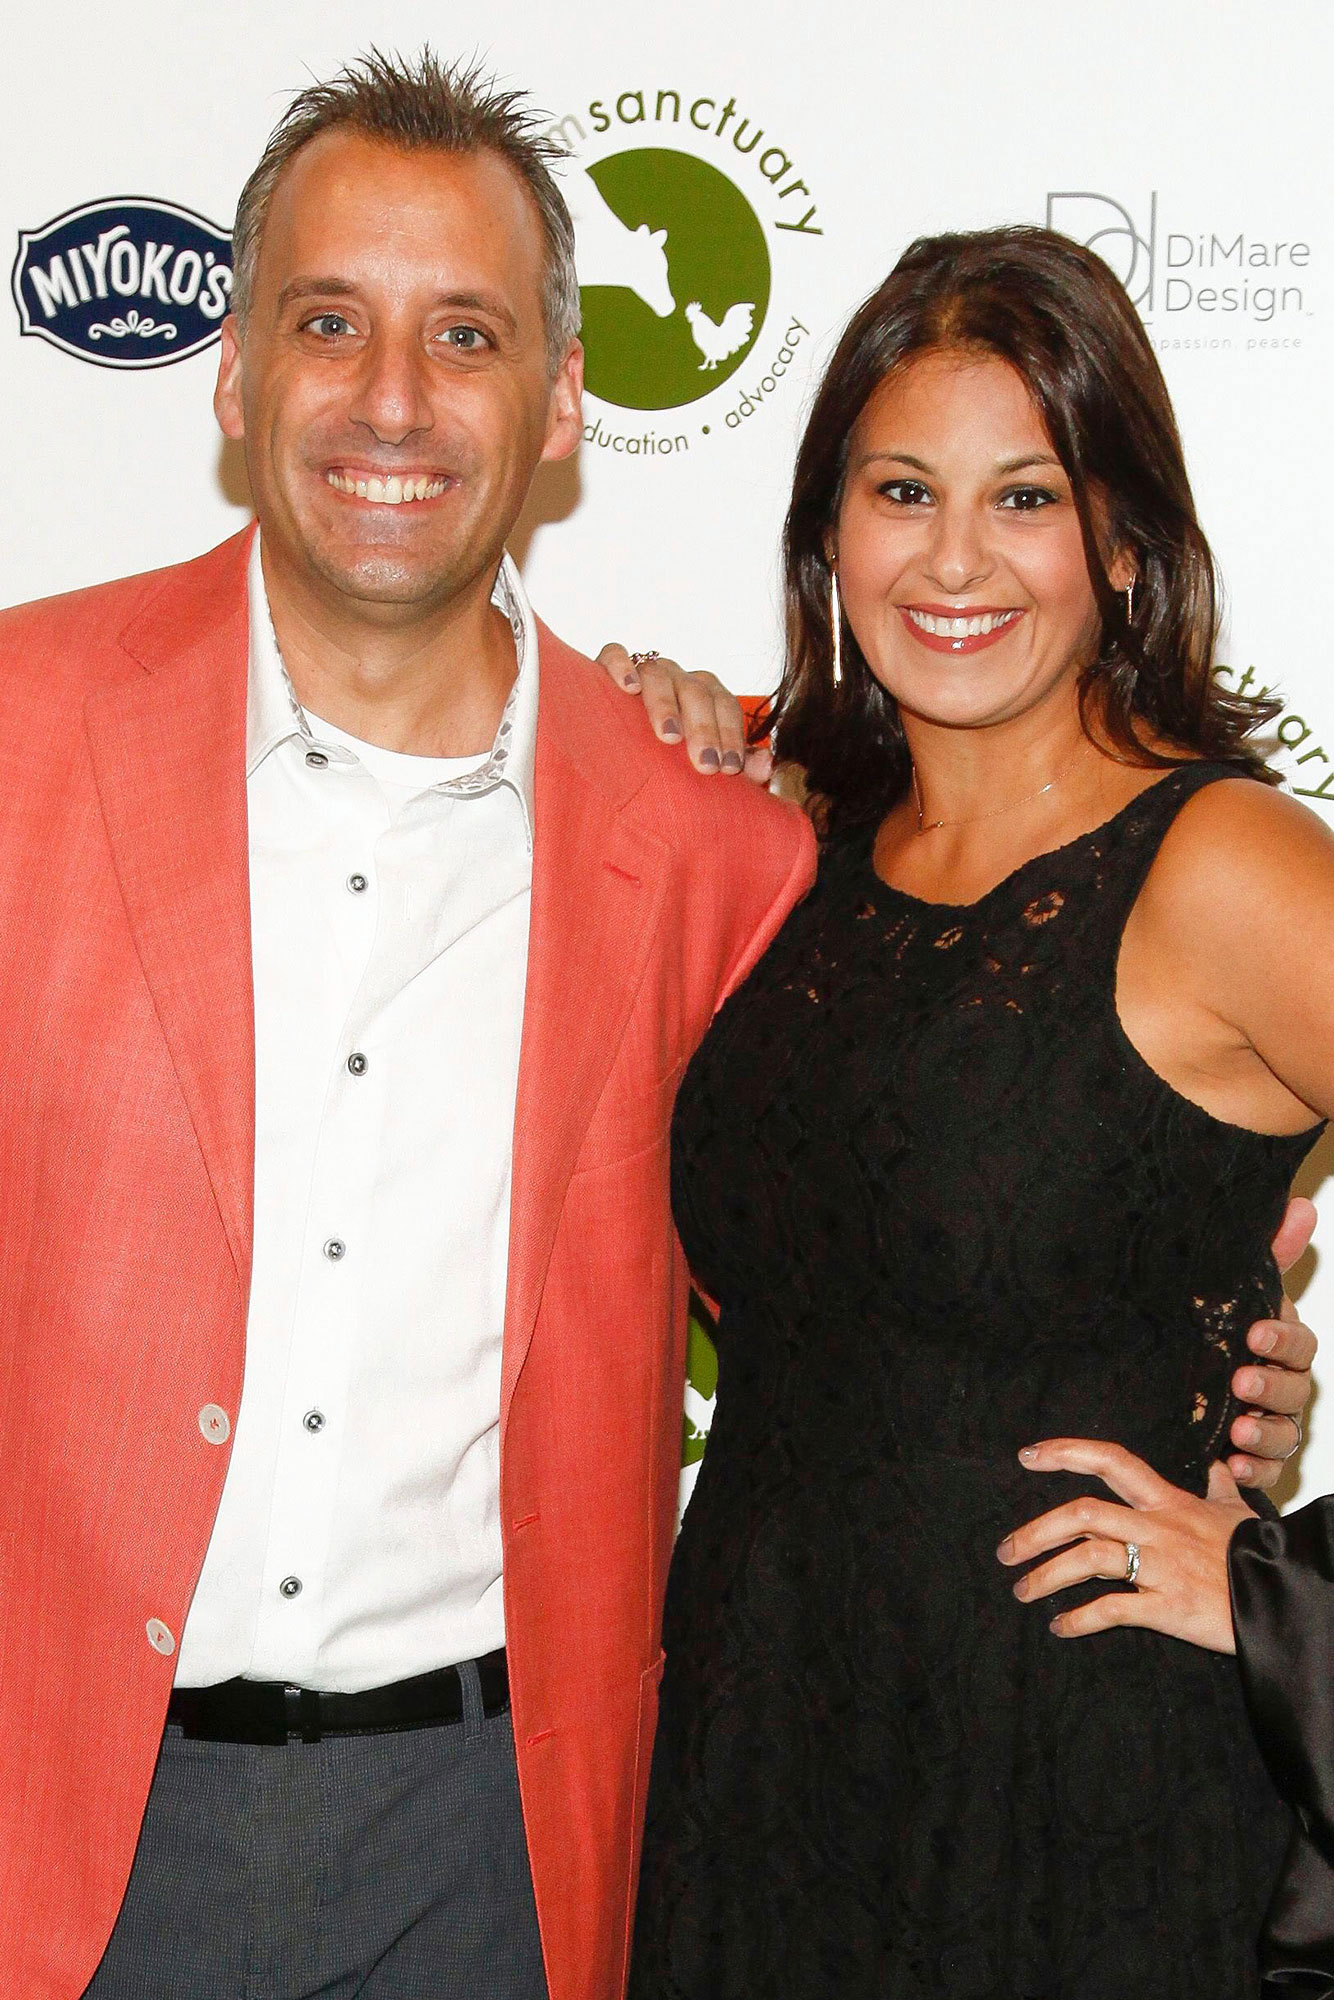 Impractical Jokers' Joe Gatto and Bessy Gatto's Relationship Timeline